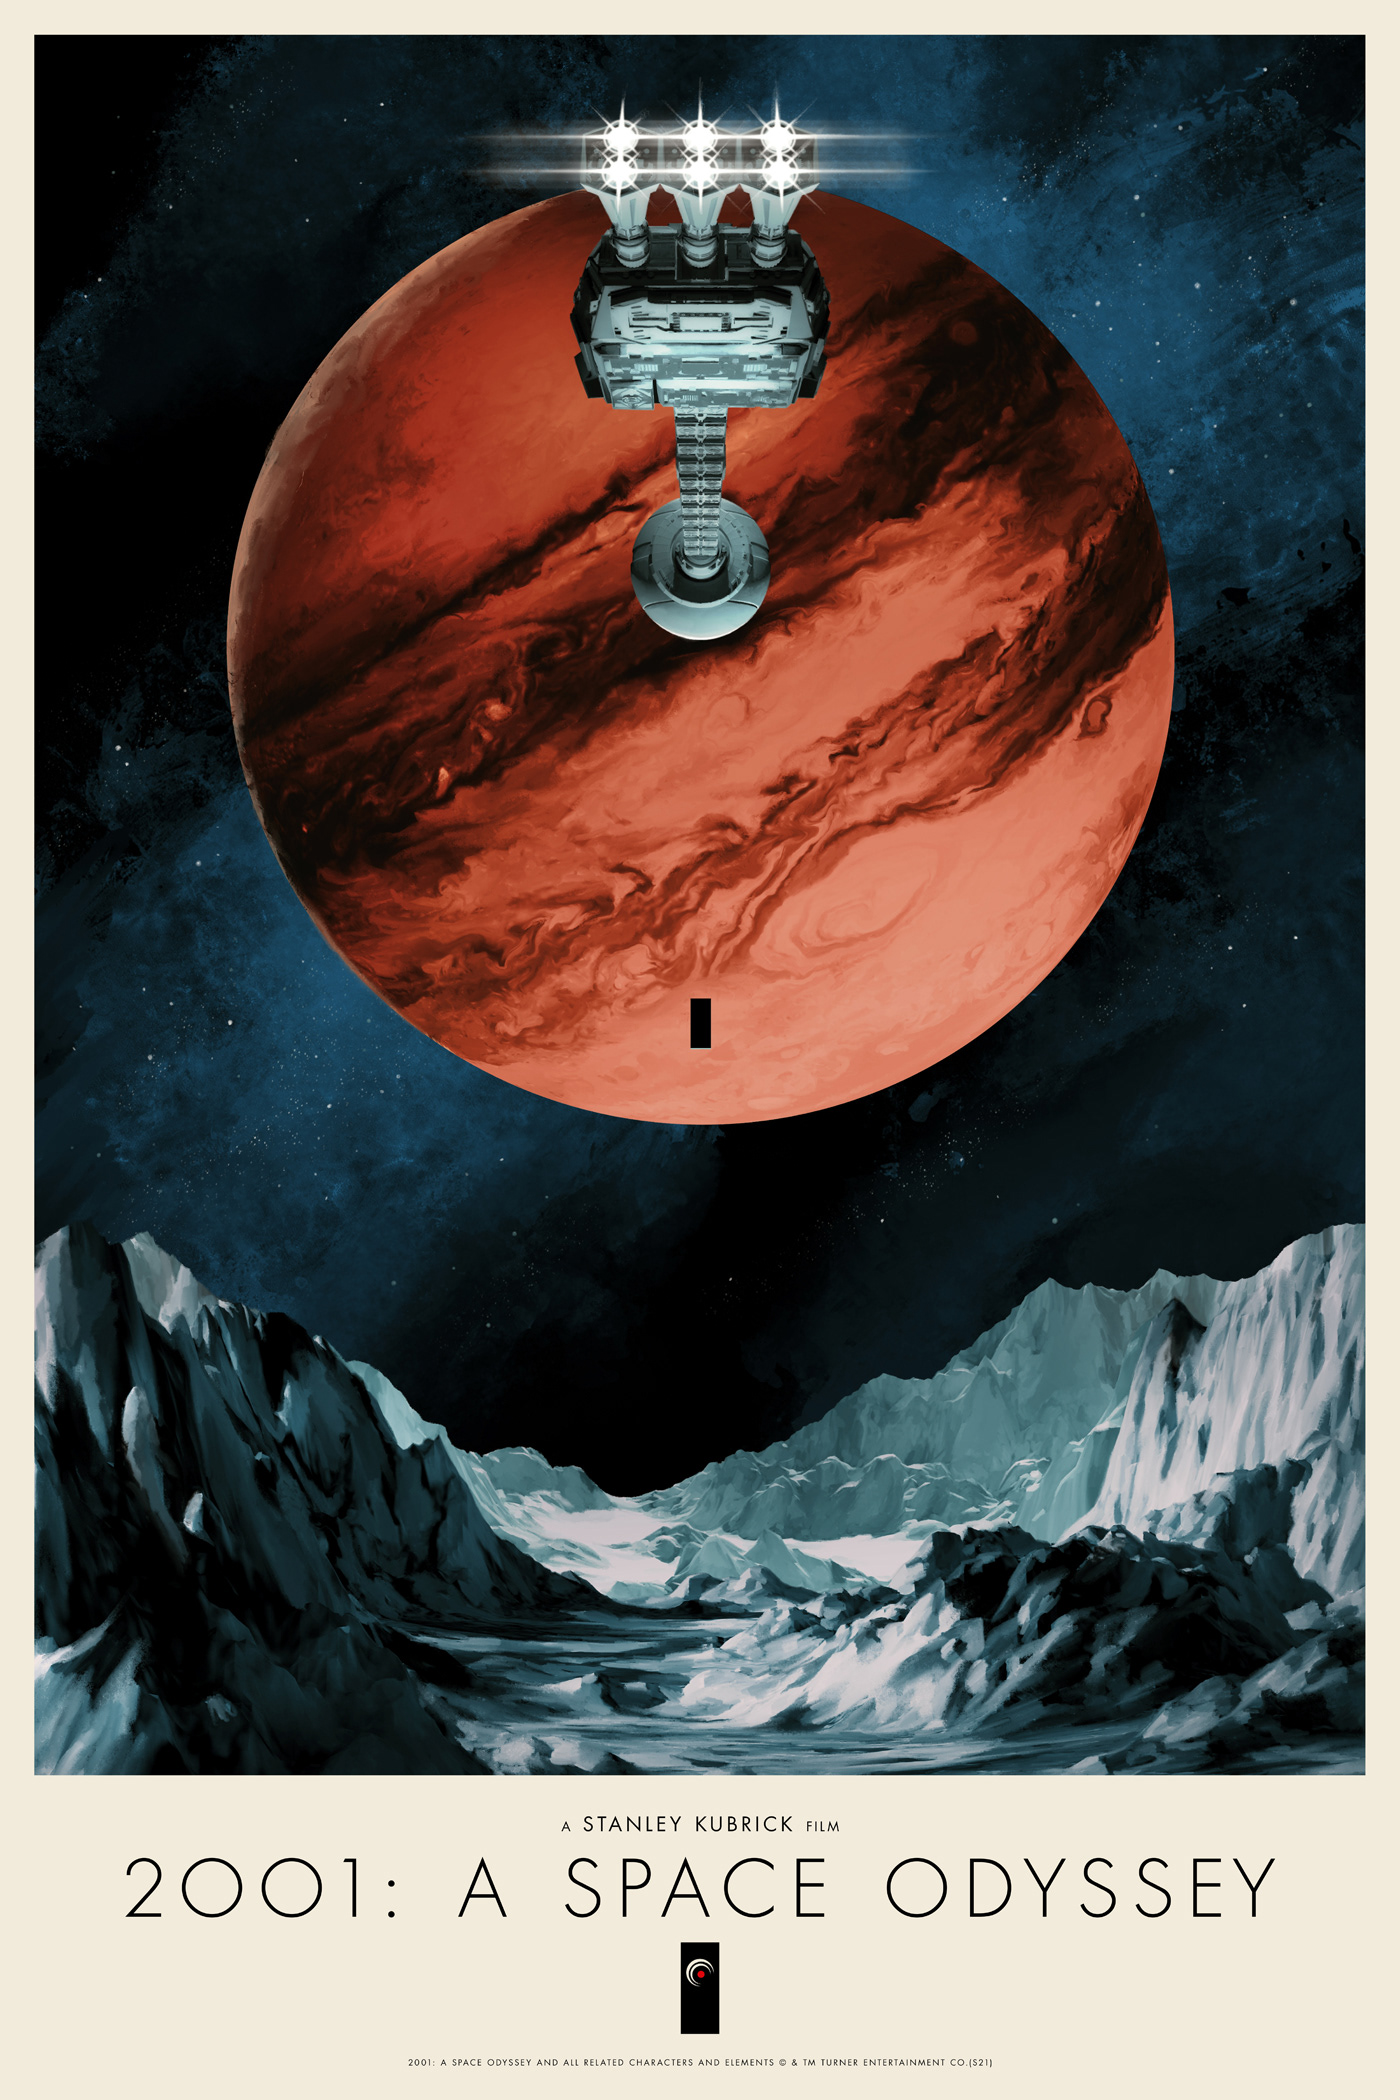 Classic movie poster Poster Design posters Scifi